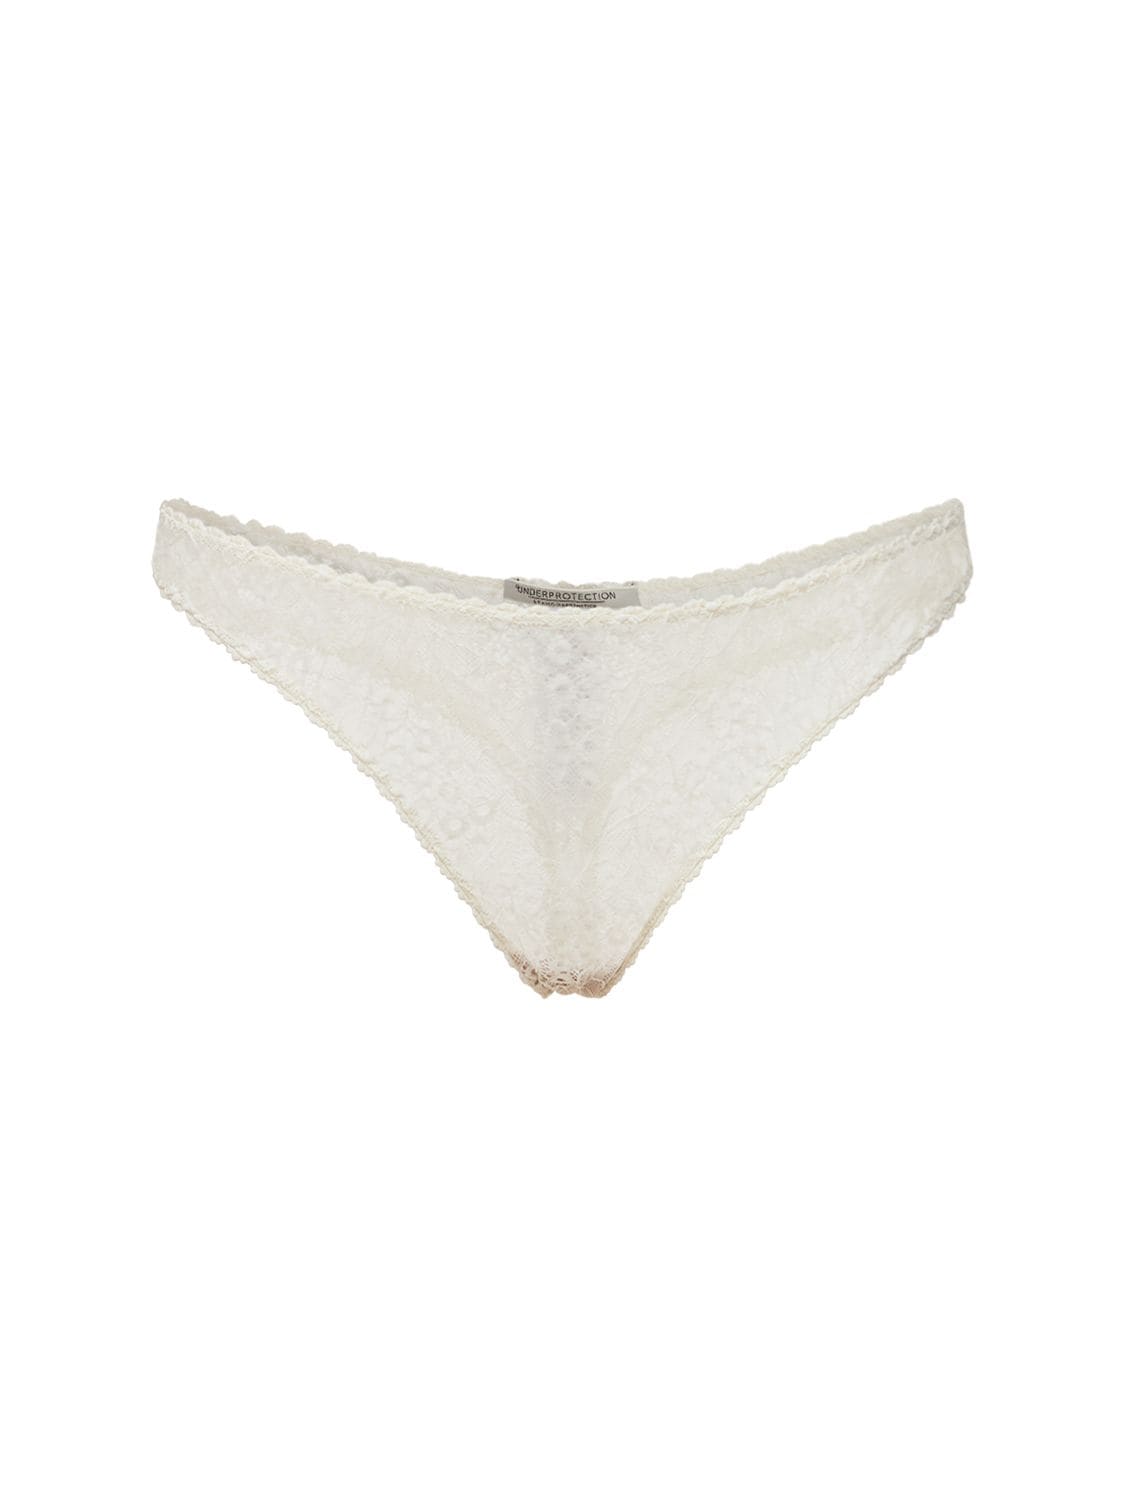 Underprotection - Emma string recycled lace thong - Creme | Luisaviaroma